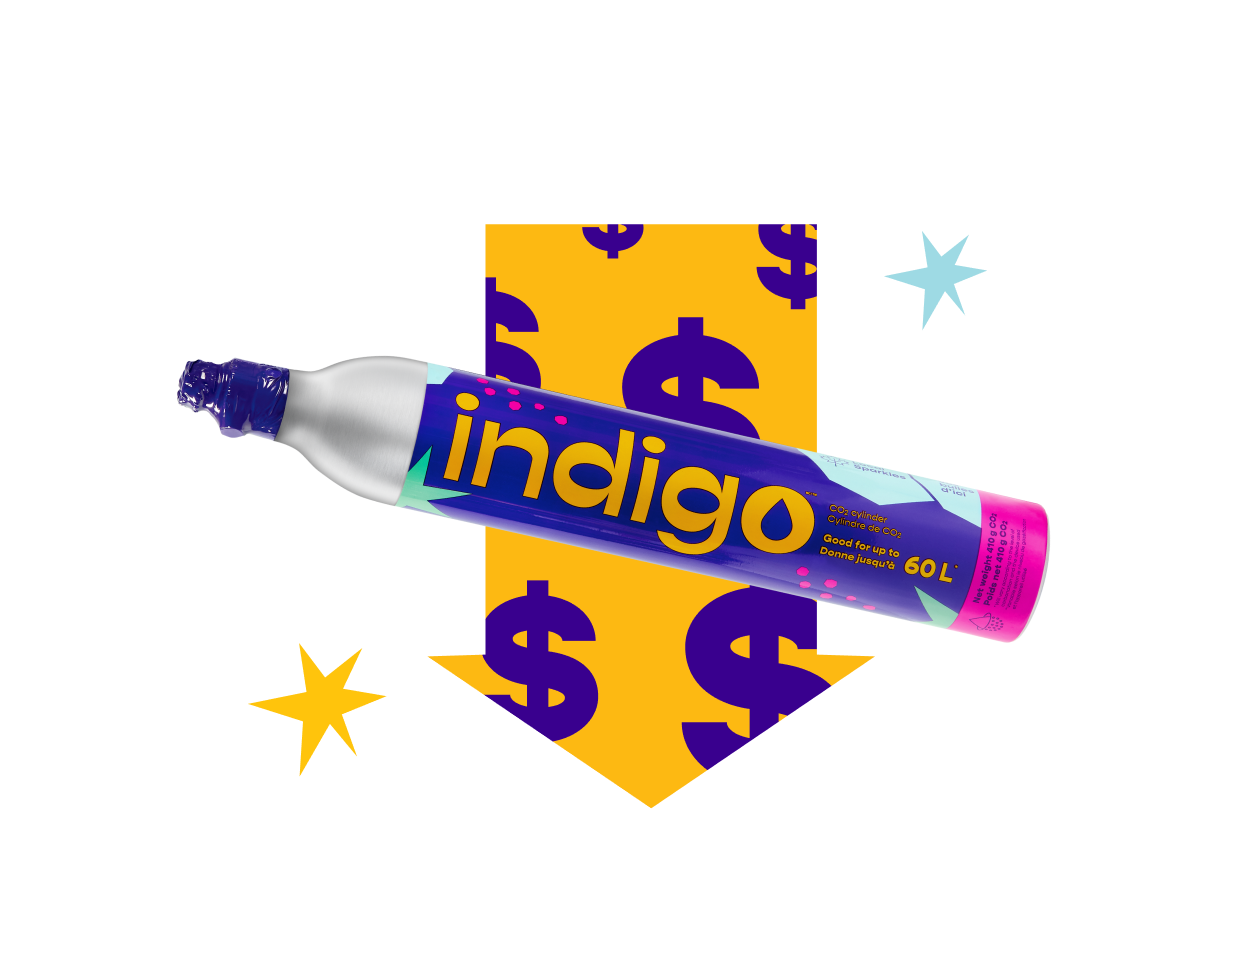 CO2 Indigo Soda cylinders less expensive than those of other brands